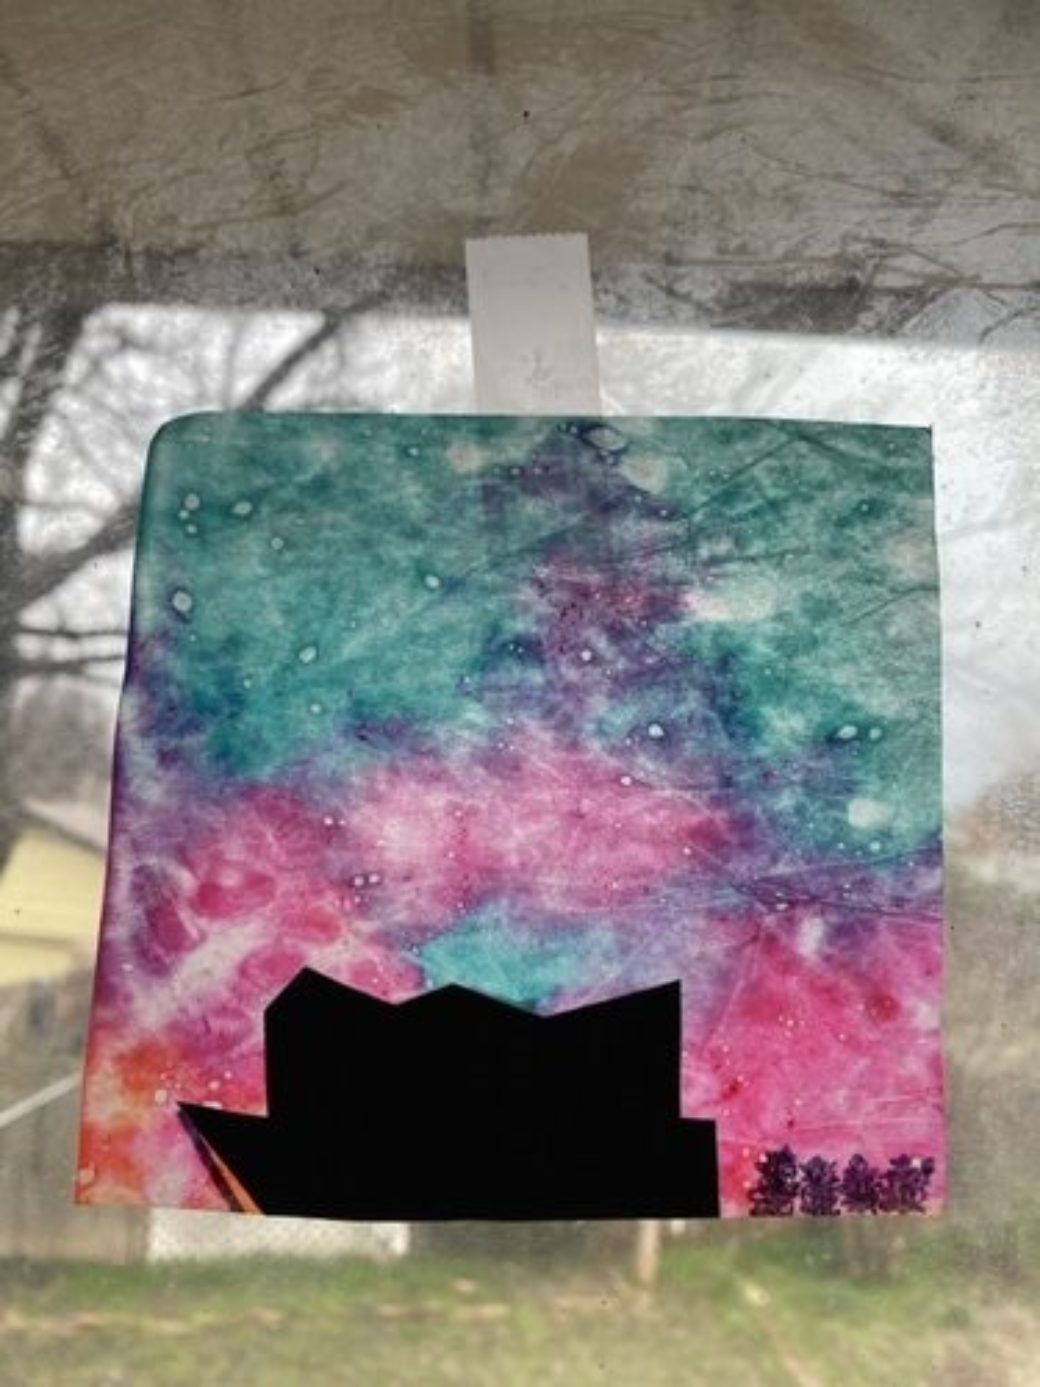 A multicolored, tie-dyed wax paper featuring the silhouette of a building drawn on it is taped in a window